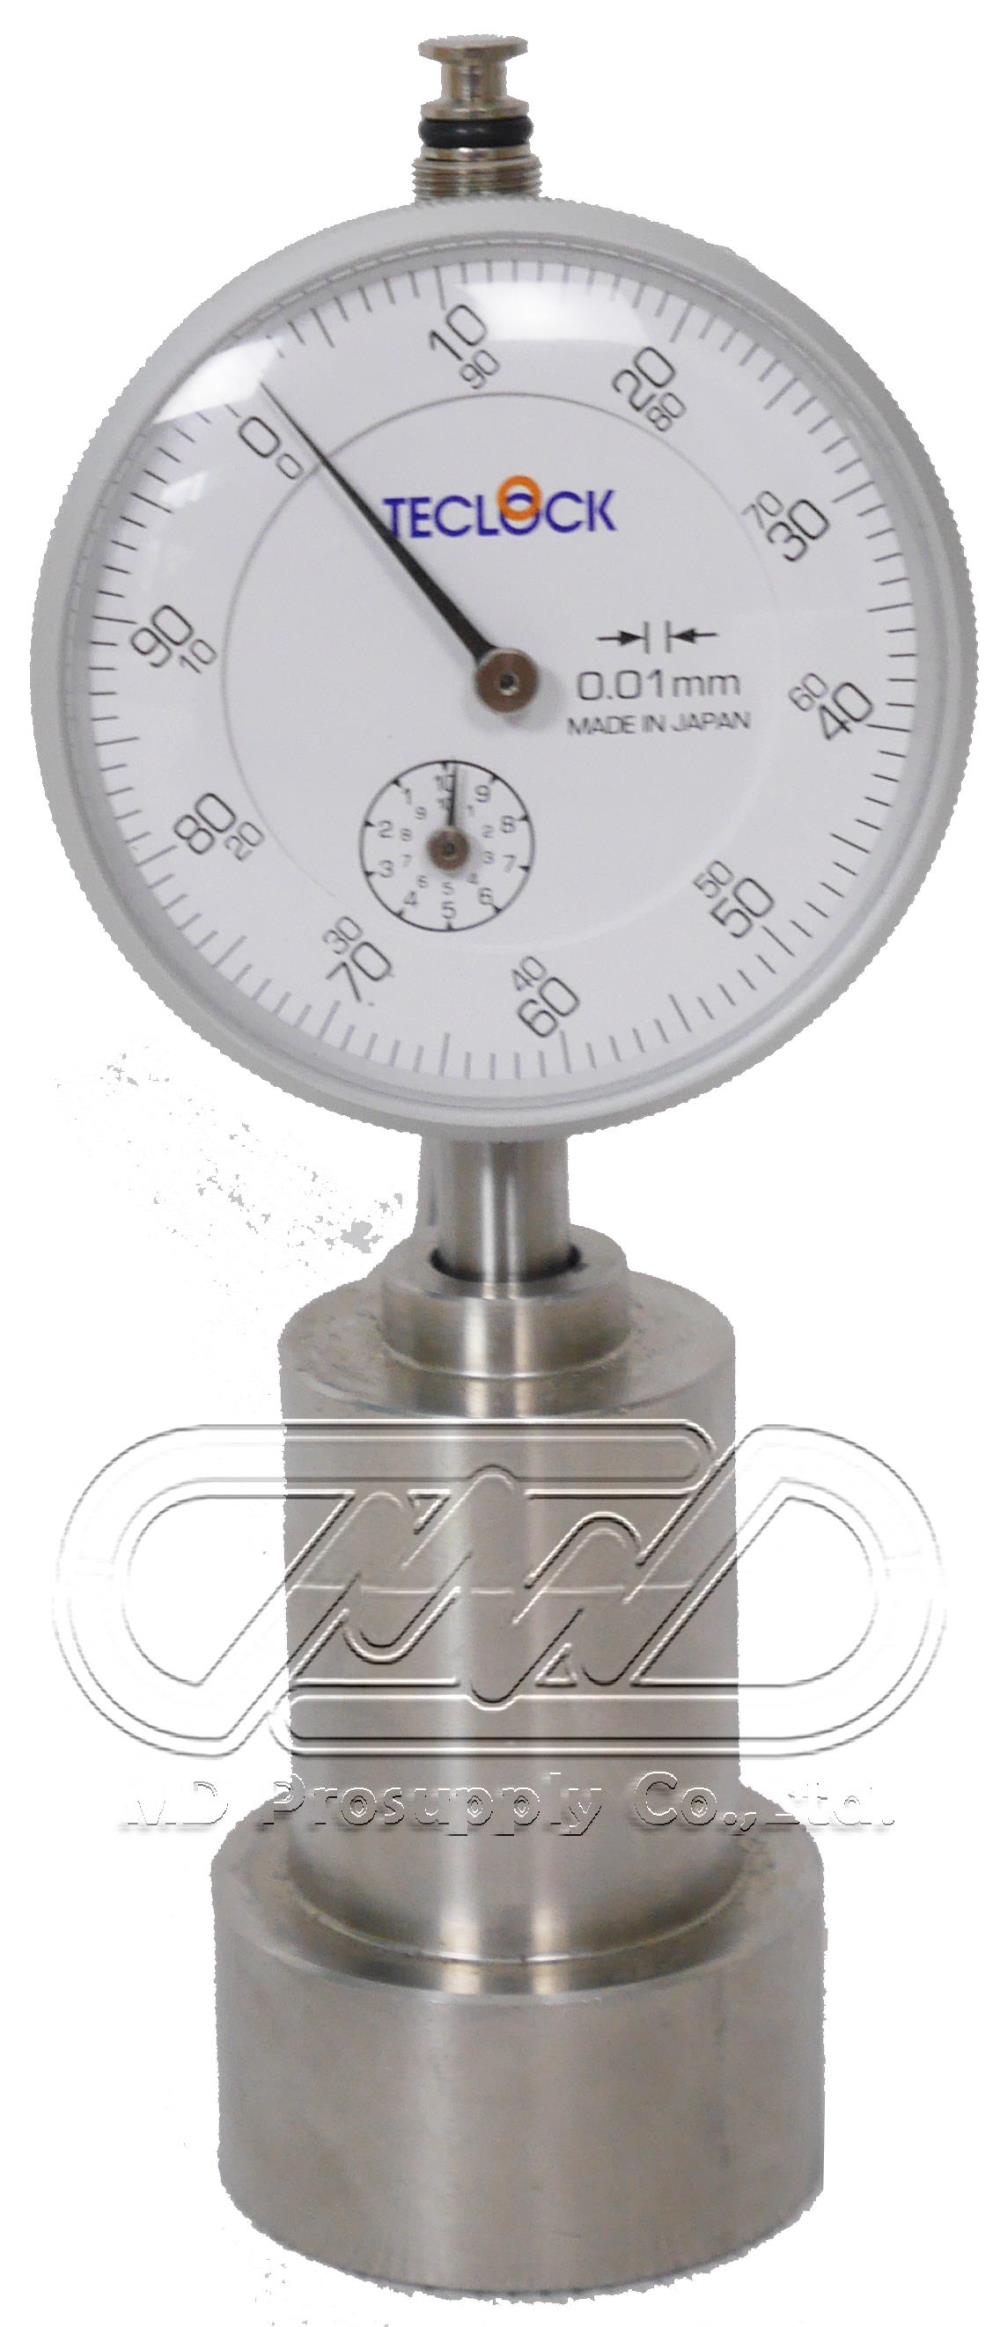 asphalt flow indicator  with gauge 30 mm. x 0.01 mm.,asphalt flow indicator  with gauge 30 mm. x 0.01 mm.,MD,Engineering and Consulting/Contractors